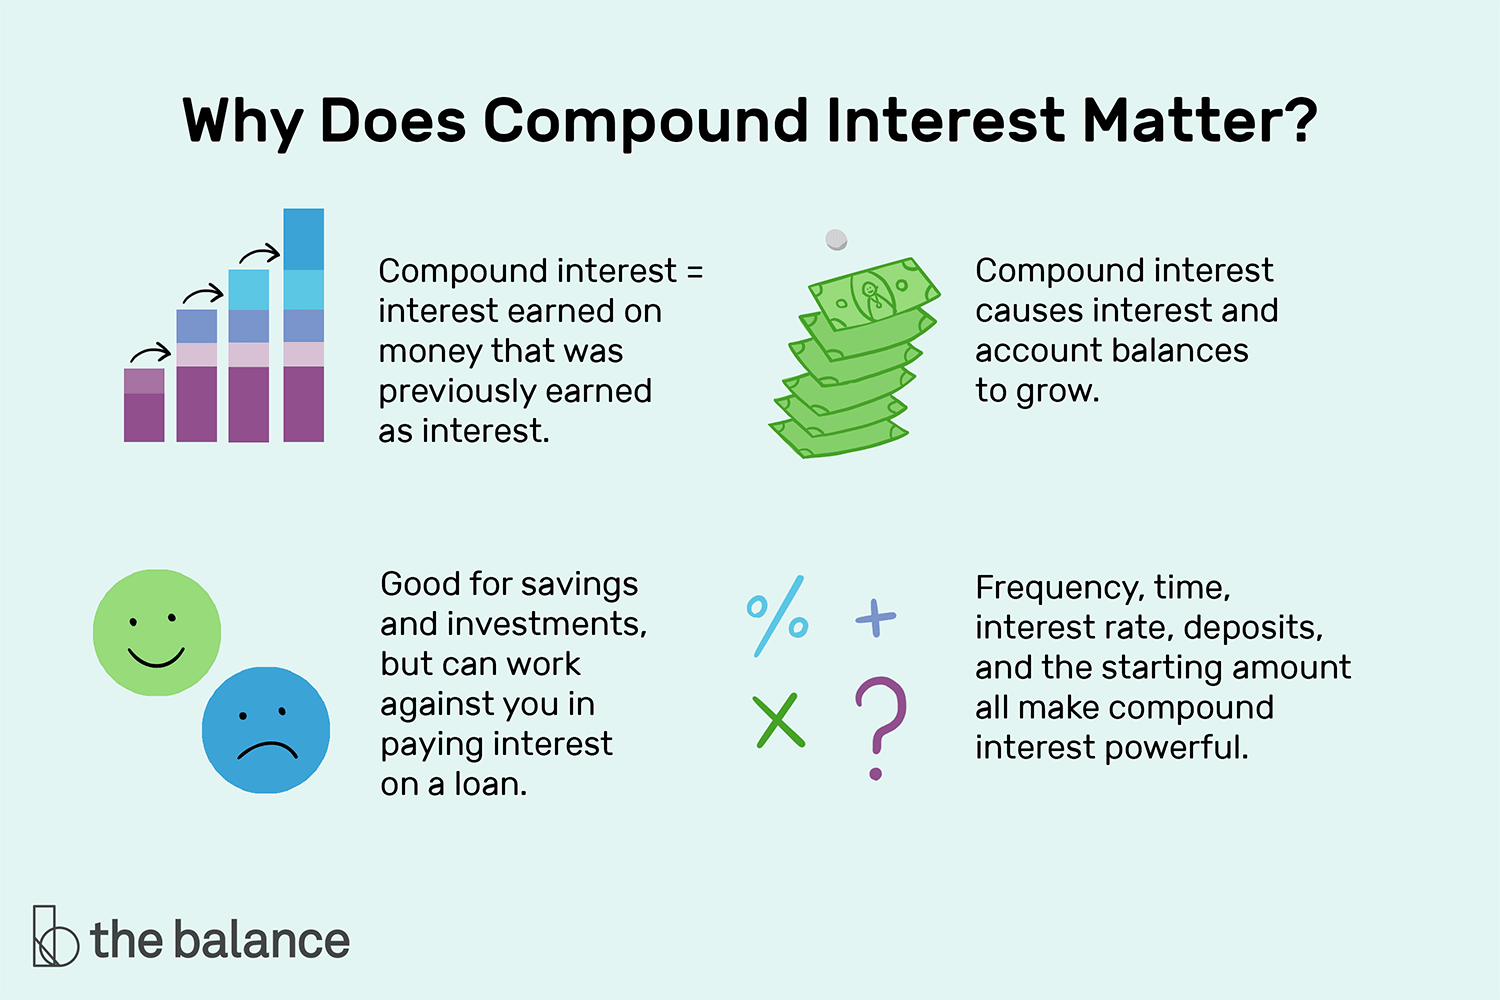 What Is the Link Between Mutual Funds and Compound Interest?